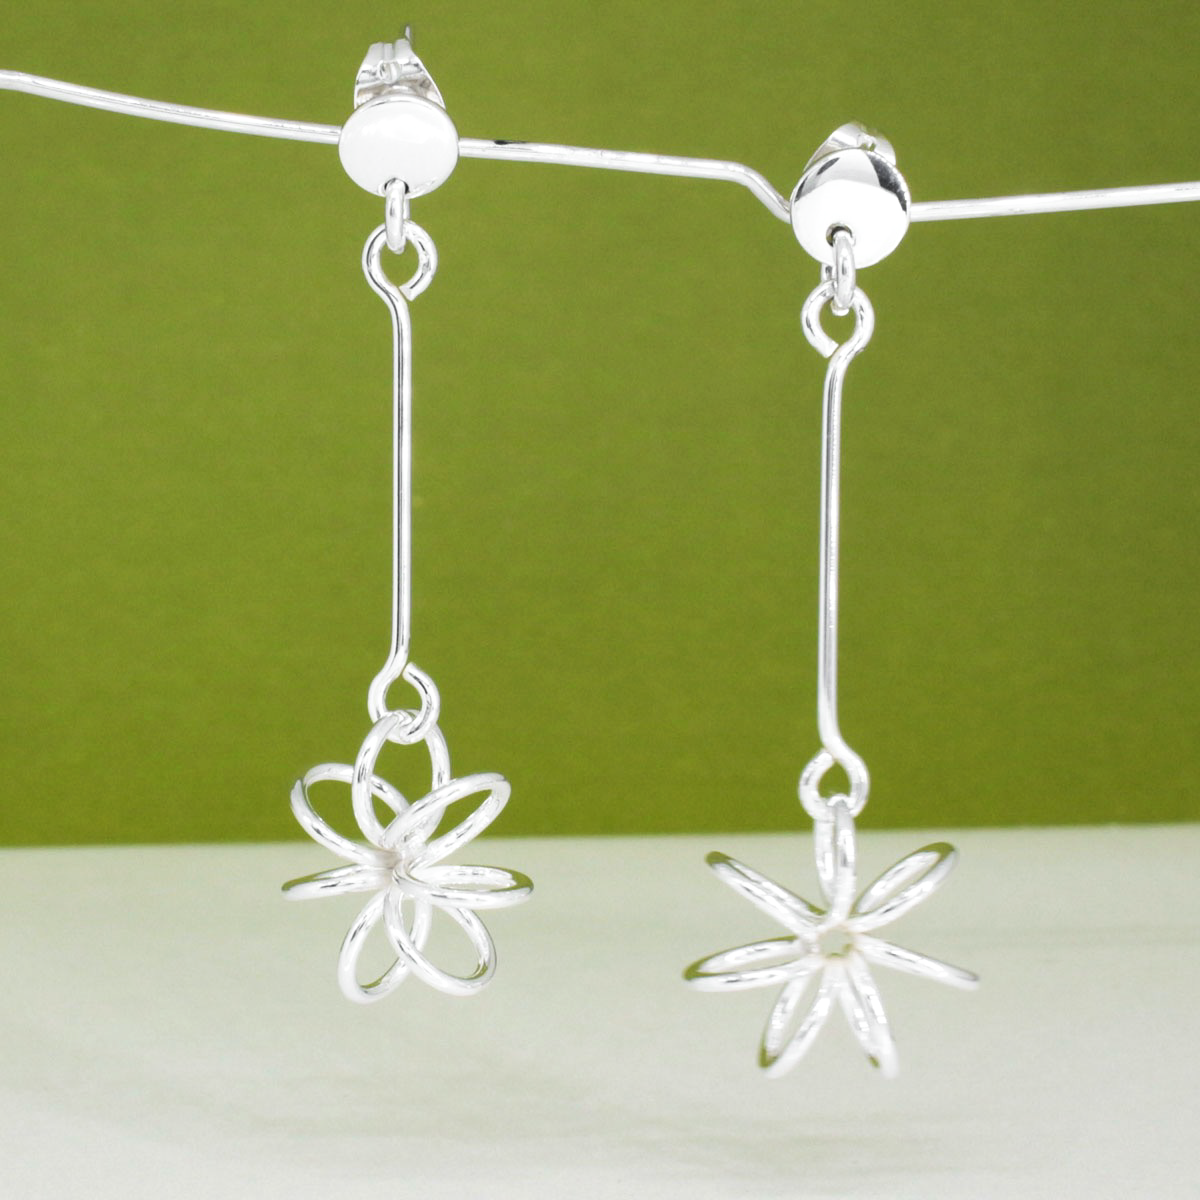 Moineir Floating Flower Silver Earrings - Studs: where whimsy meets elegance in stunning craftsmanship. Handcrafted from .925 sterling silver, these earrings feature a charming 14mm flower on a slim 36mm stem, they strike a perfect balance between subtlety and statement. With a secure friction back, they're comfortable for day-to-night wear.&nbsp;